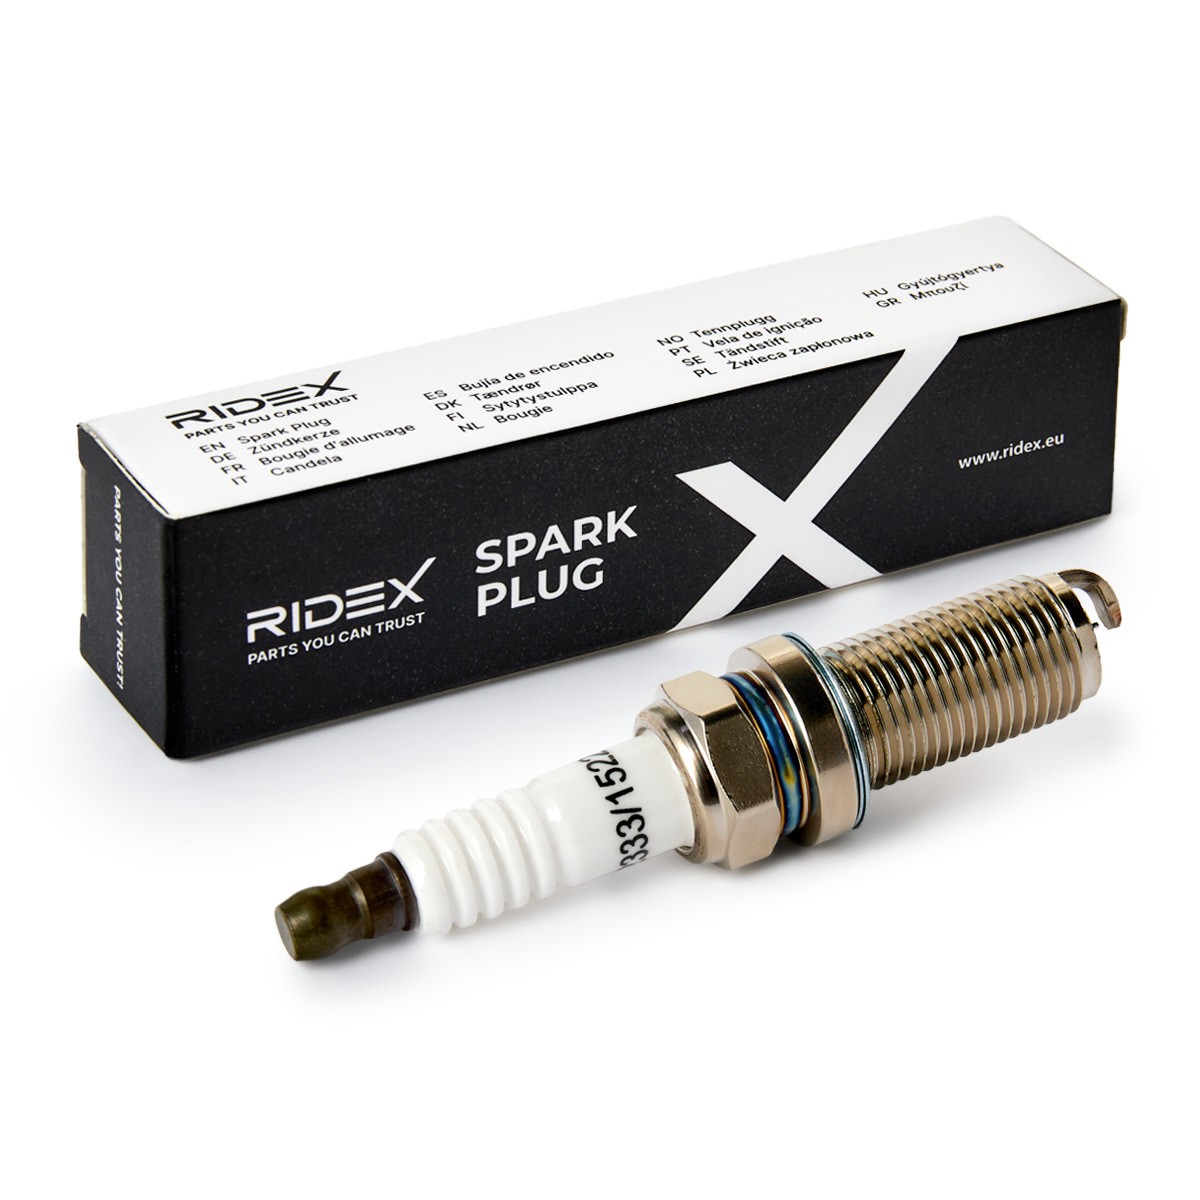 Great value for money - RIDEX Spark plug 686S0118